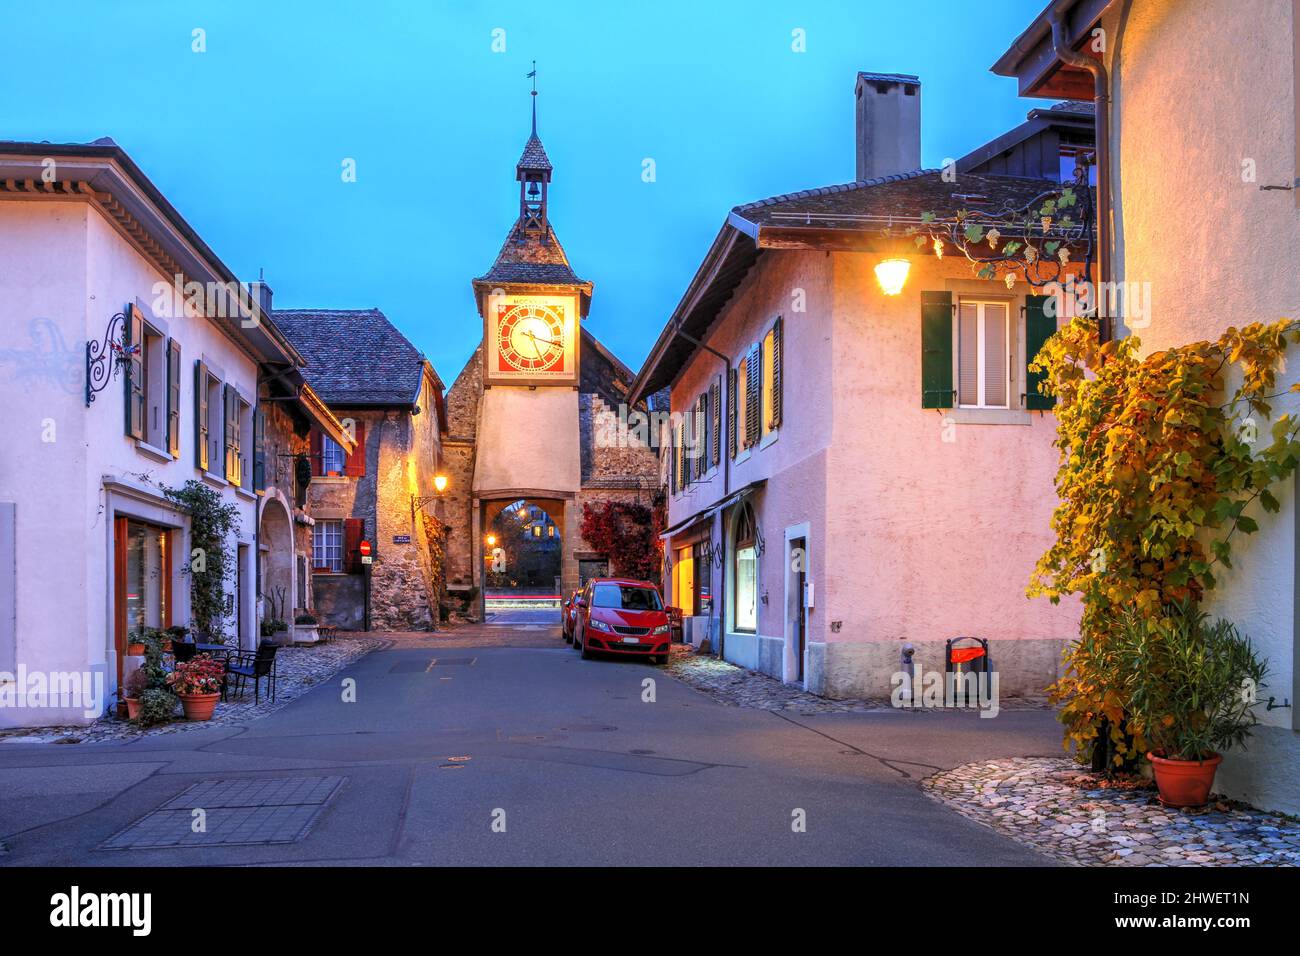 Night scene in the medieval town of Saint-Prex (St. Prex) in Vaud Canton, close to Morges in Switzerland featuring the main Town Gate. Stock Photo